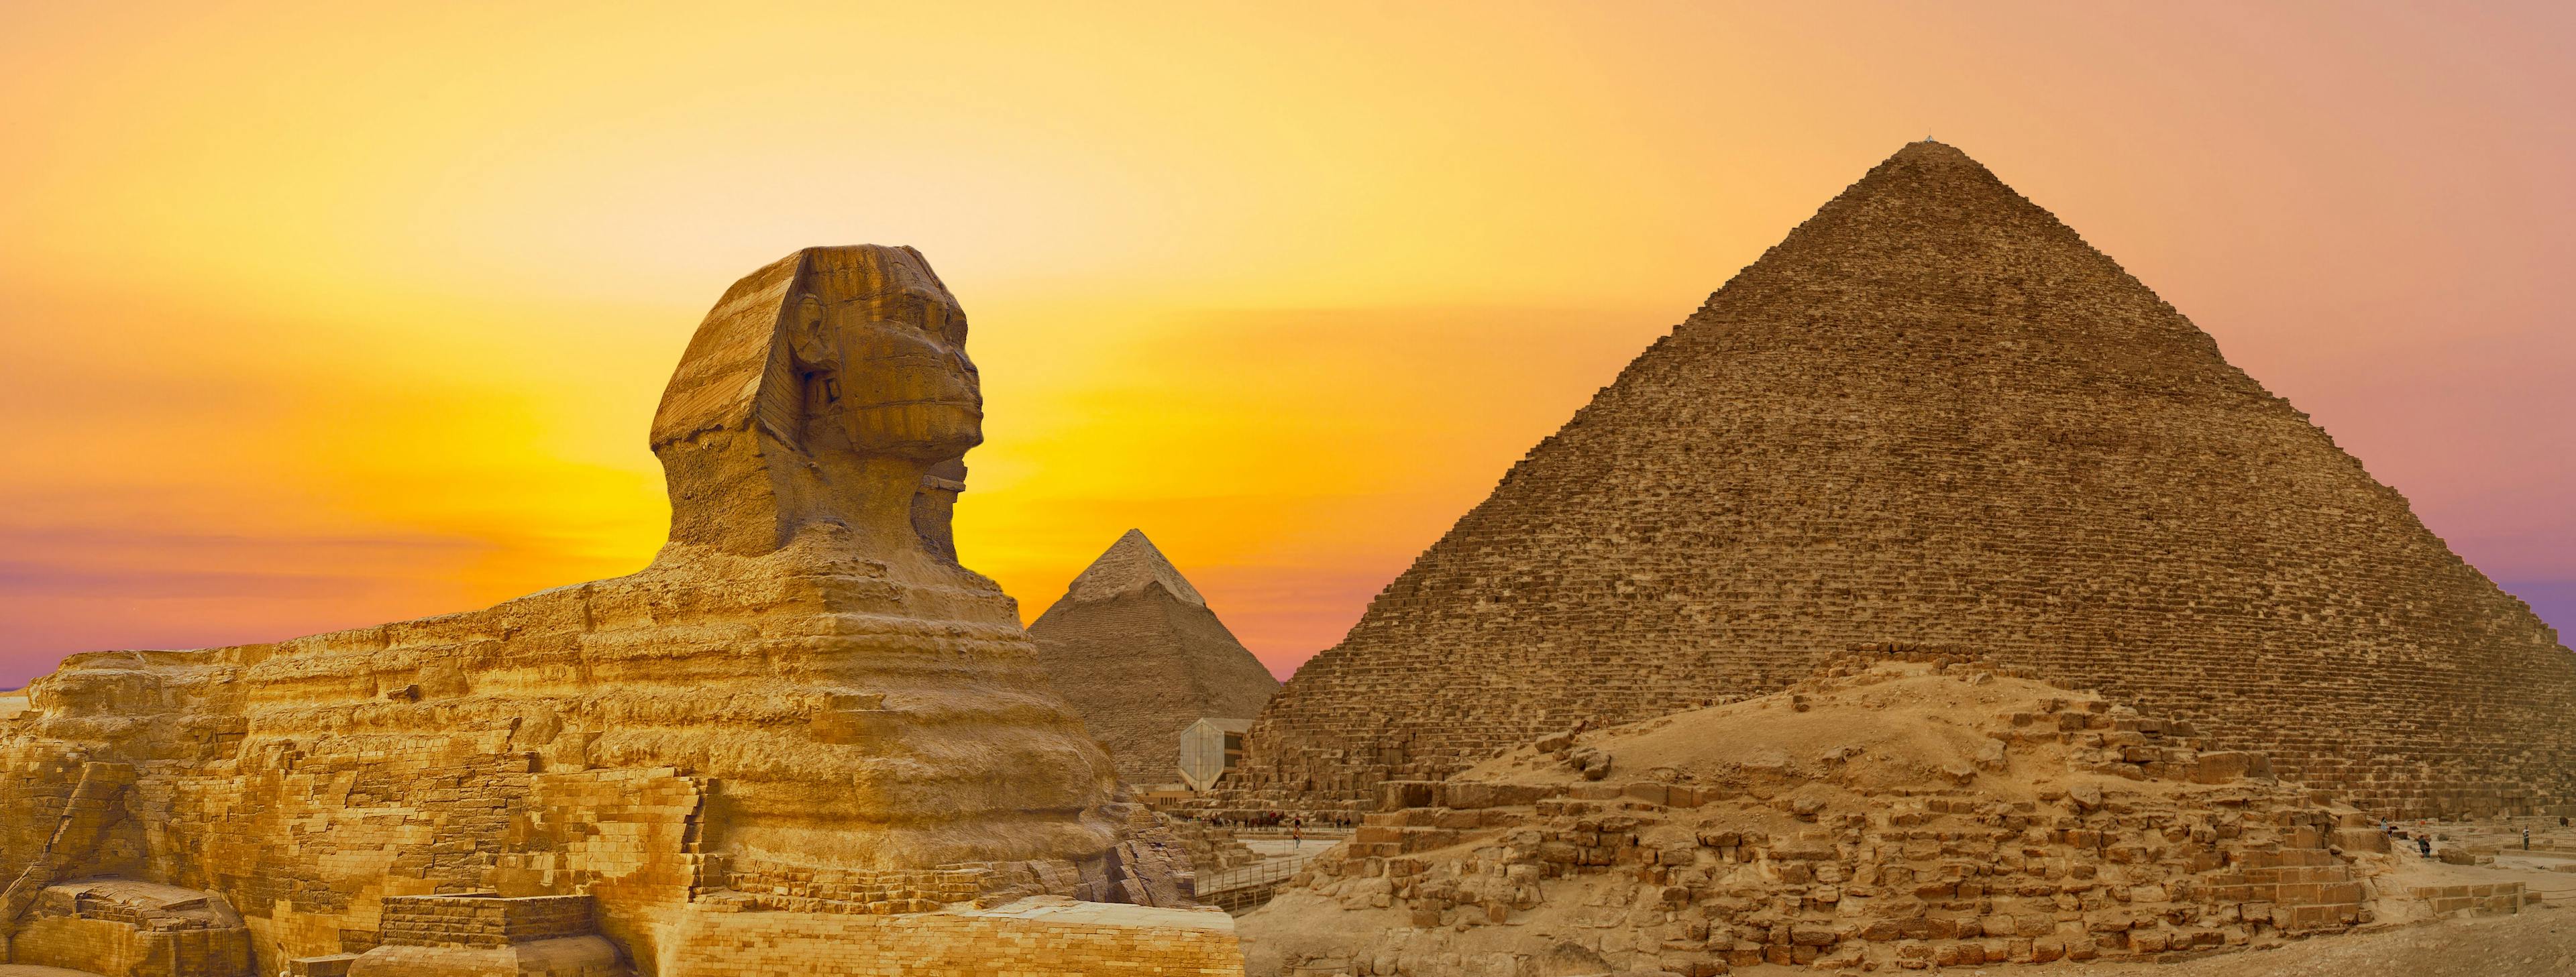 Sphinx against the backdrop of the great Egyptian pyramids. Africa, Giza Plateau. | Image Credit: © Mountains Hunter - stock.adobe.com 